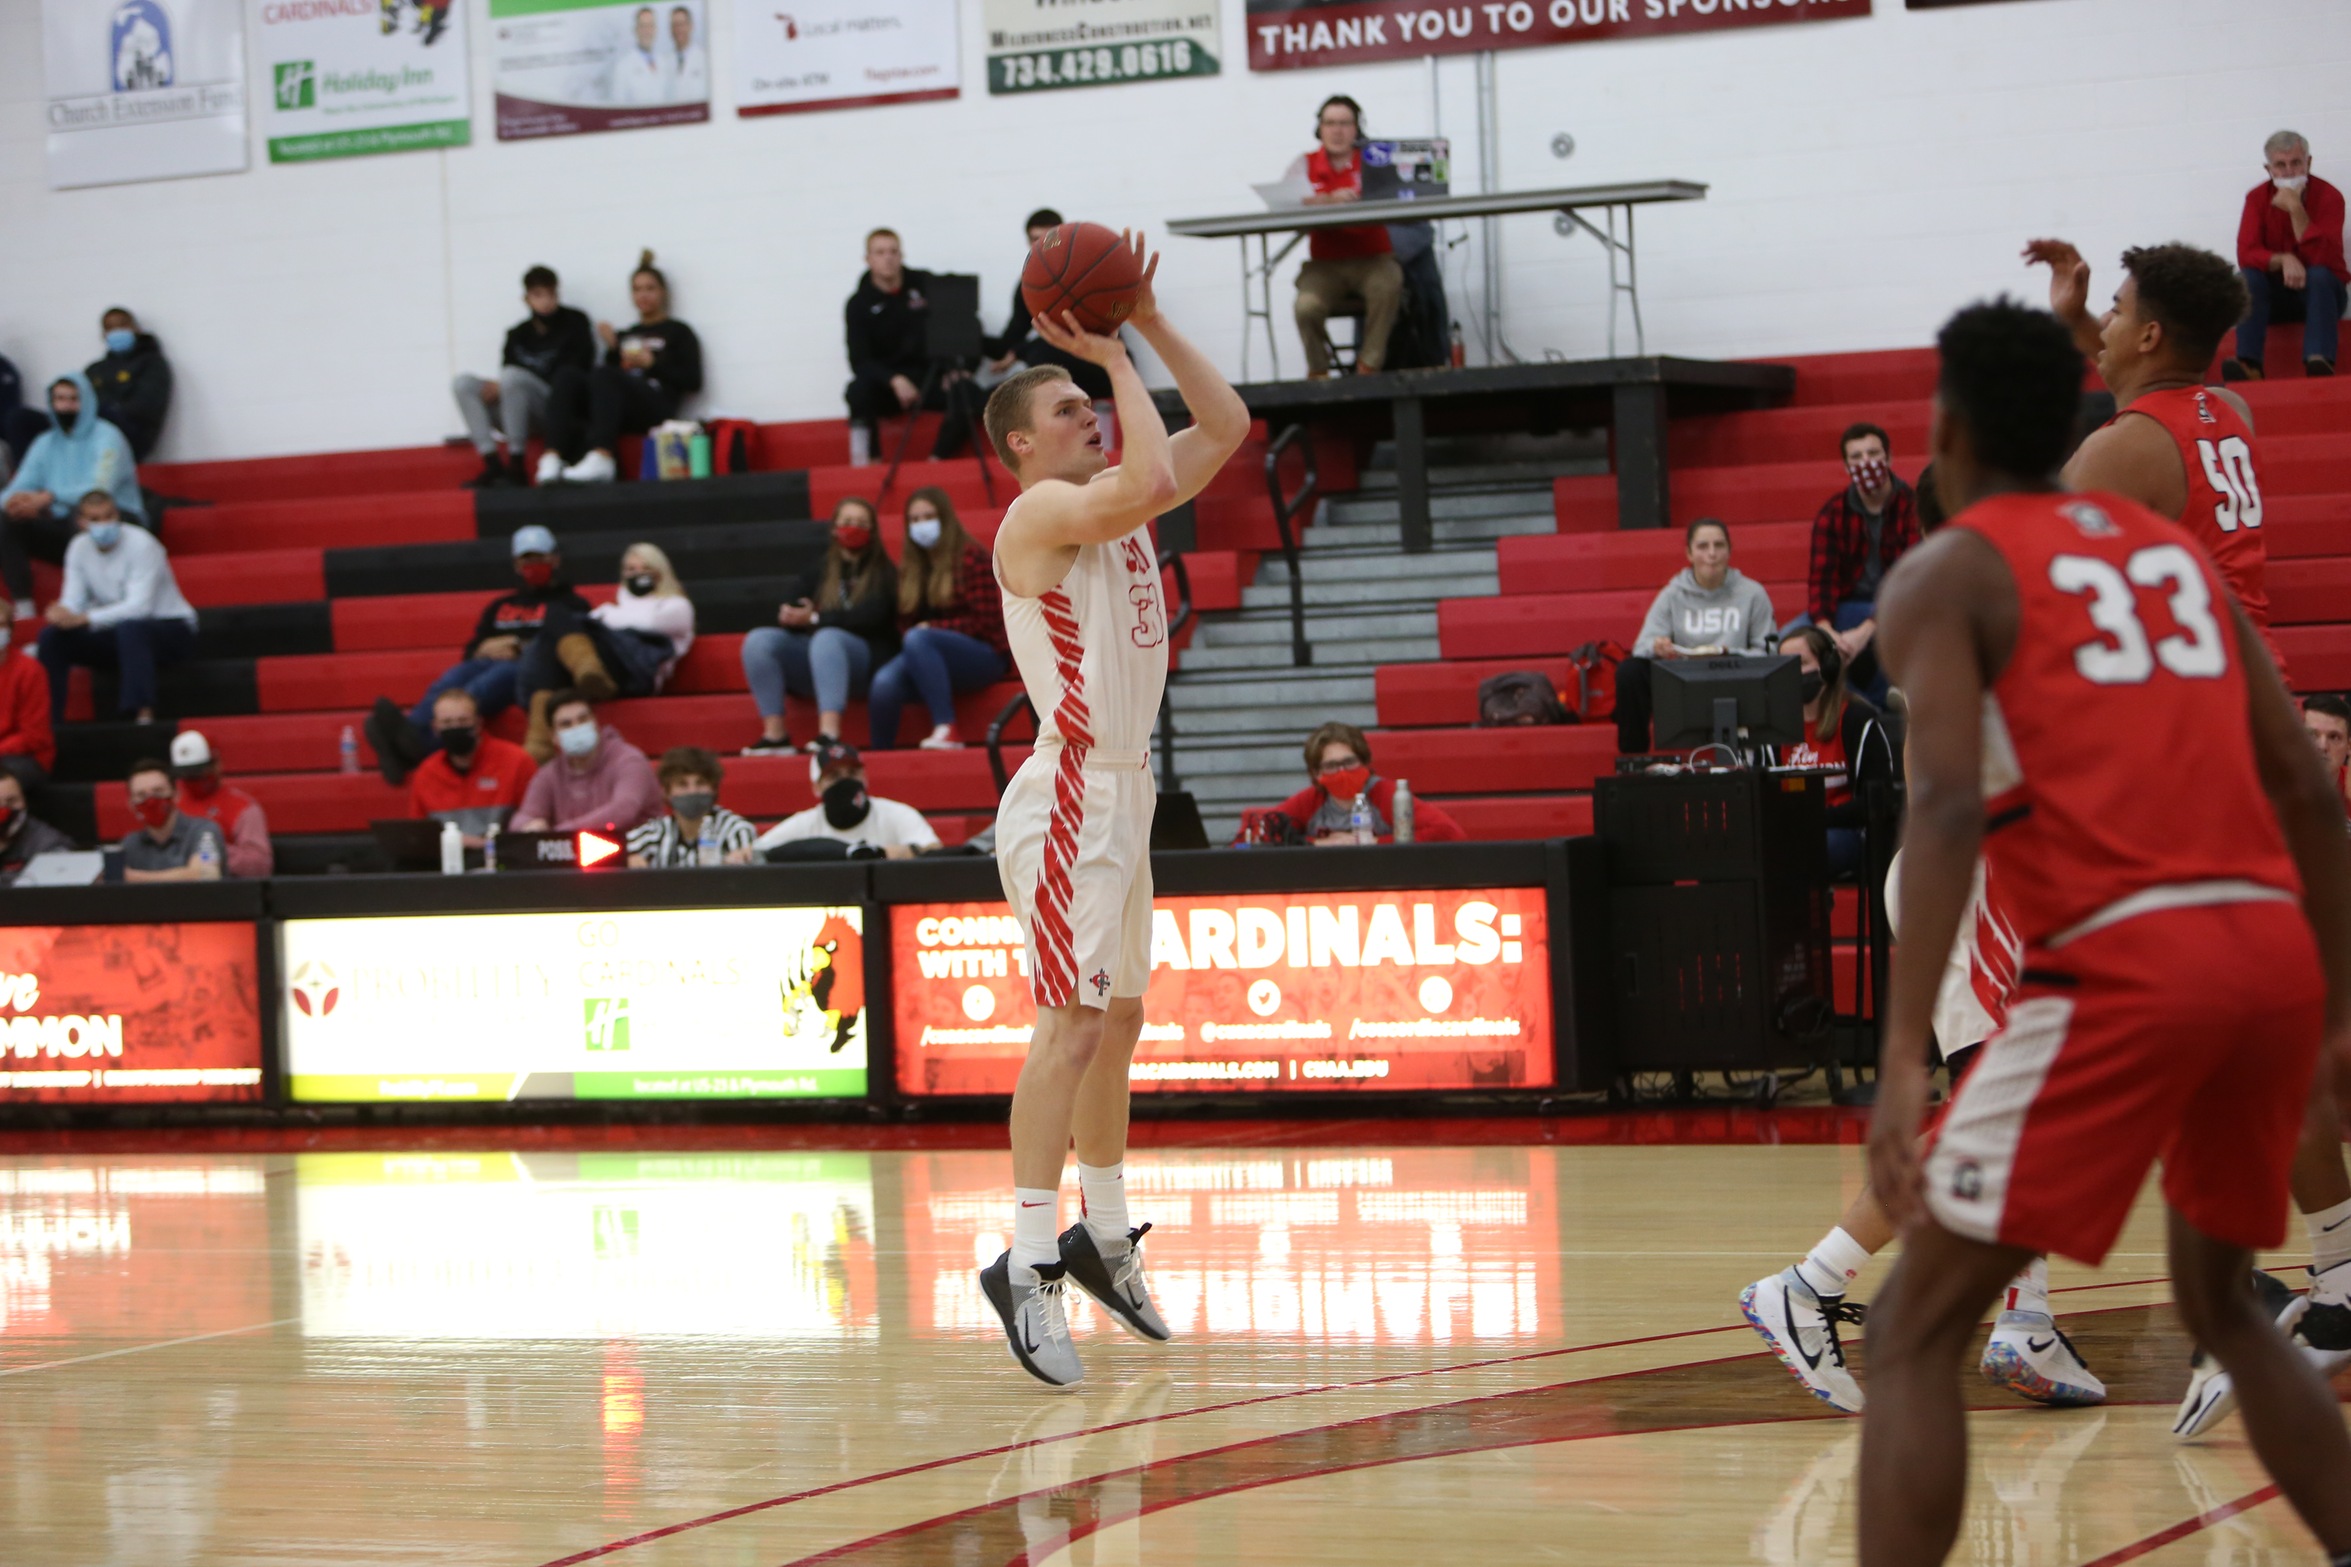 Cardinals fall late to Blue Devils, 74-70